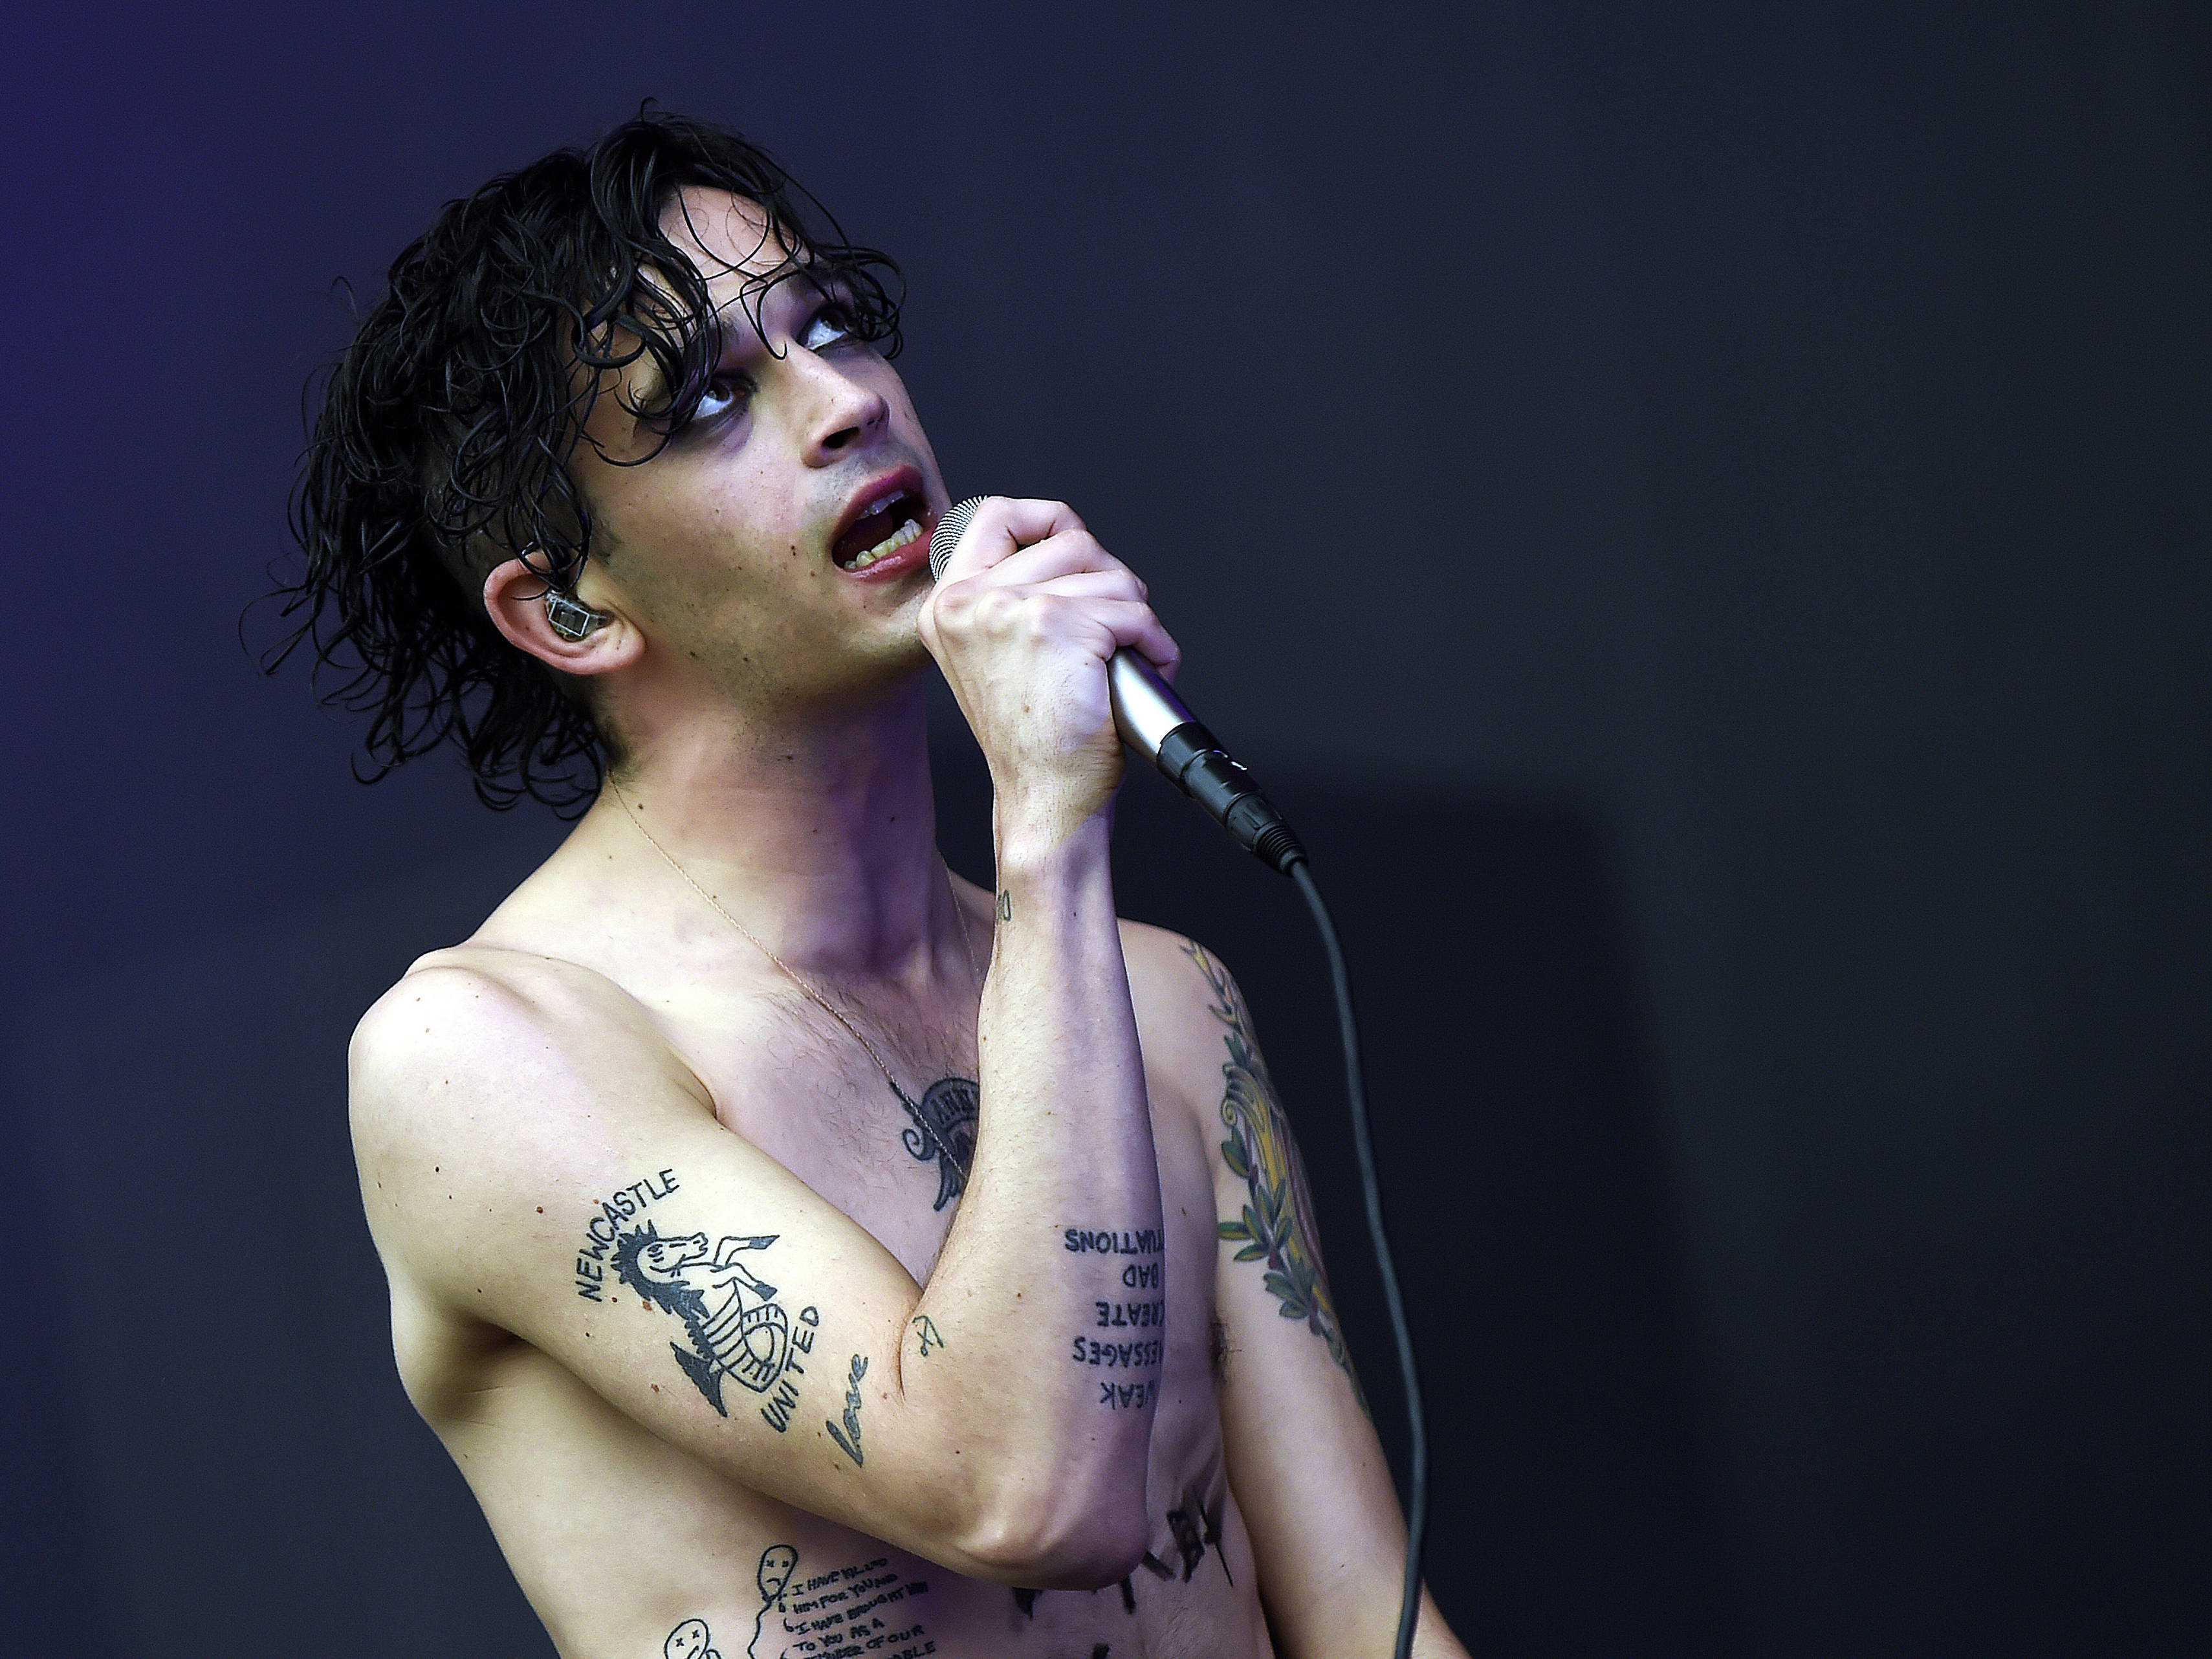 The 1975 Are Dropping Music Any Day Now If This Theory Is True